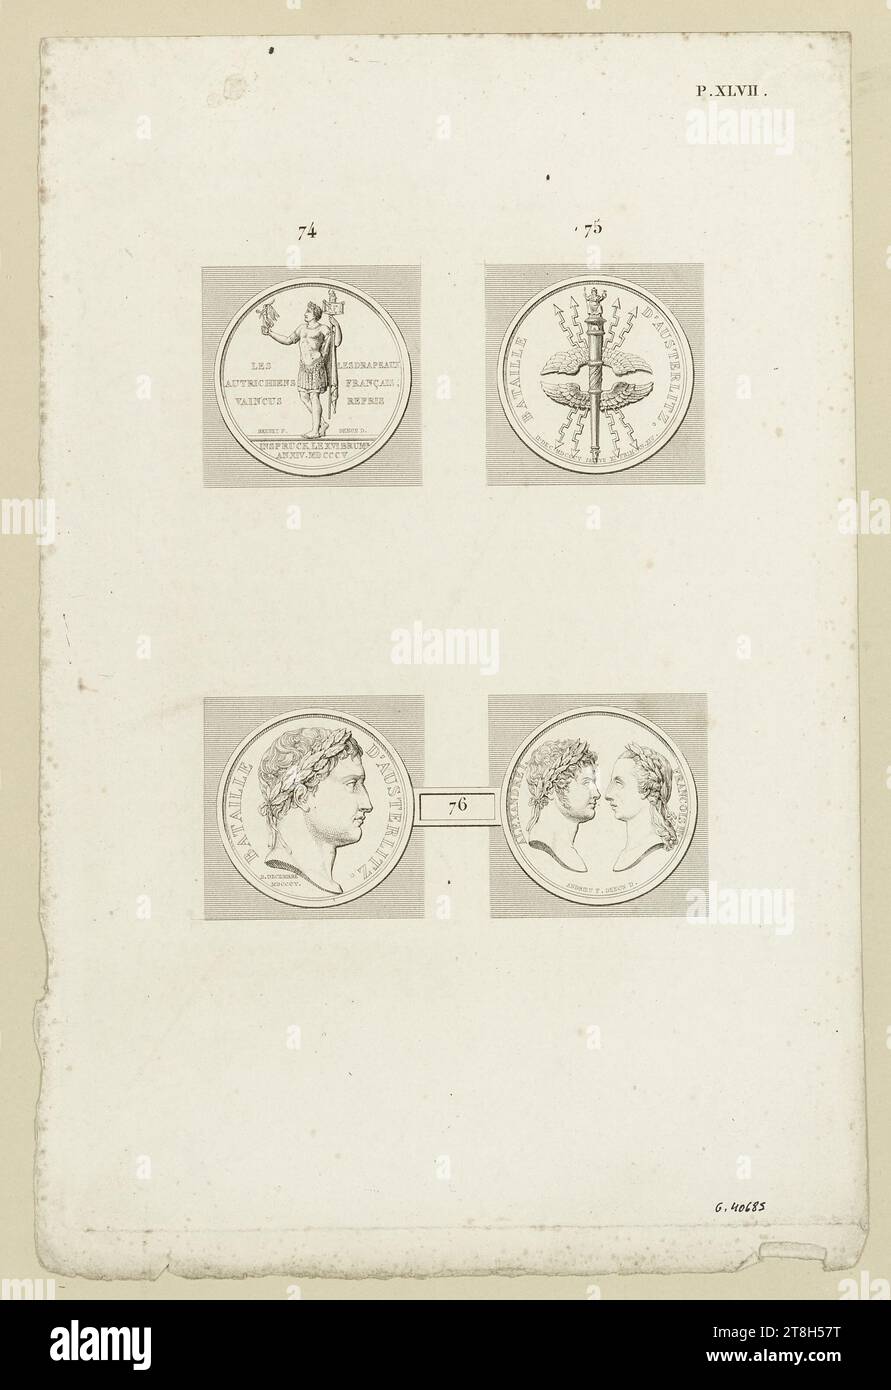 Plate of medals, numbered 74 to 76, relating to the victory of Austerlitz, Engraver, Print, Graphic arts, Print, Etching, Dimensions - Work: Height: 25.2 cm, Width: 16.6 cm, Dimensions - Mounting:, Height: 50.3 cm, Width: 32.6 cm Stock Photo